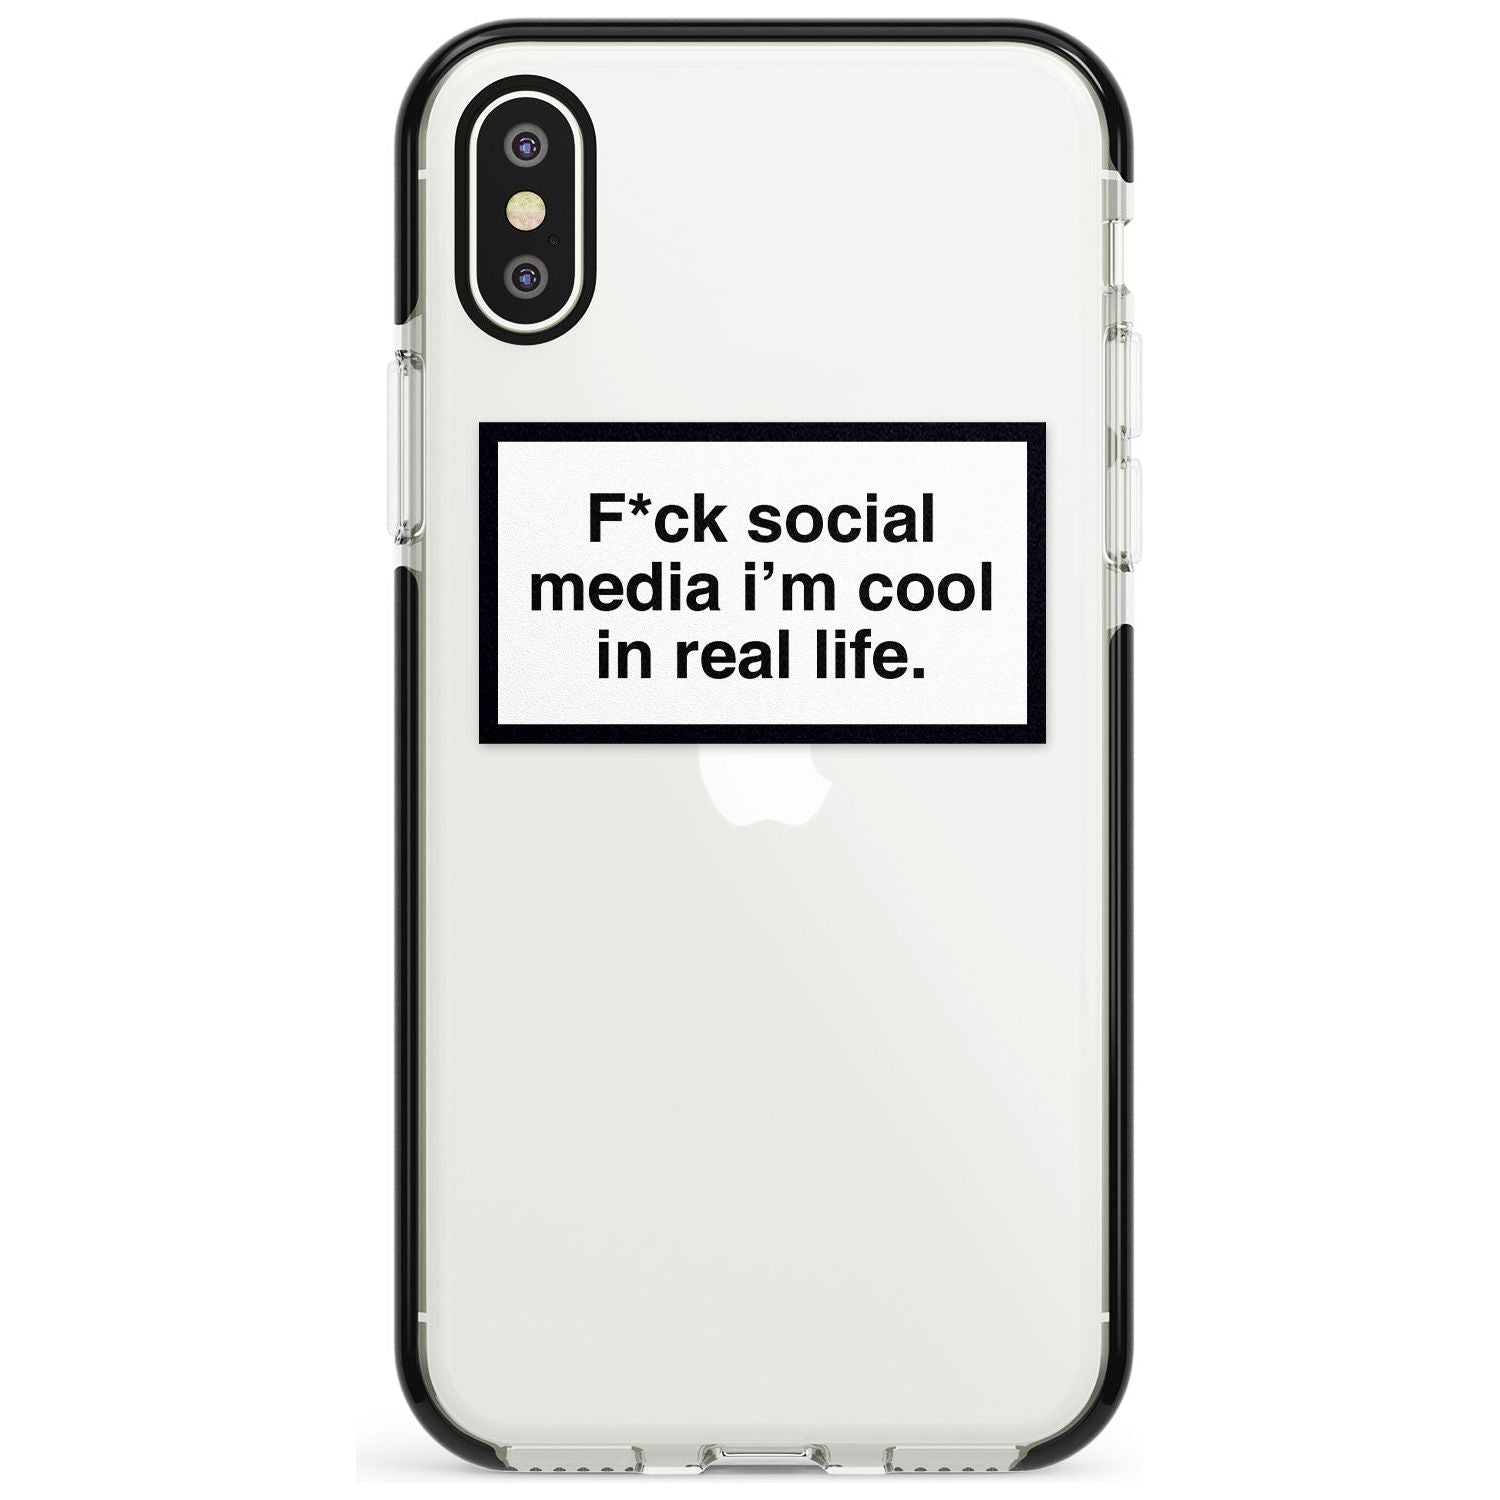 F*ck social media I'm cool in real life Pink Fade Impact Phone Case for iPhone X XS Max XR